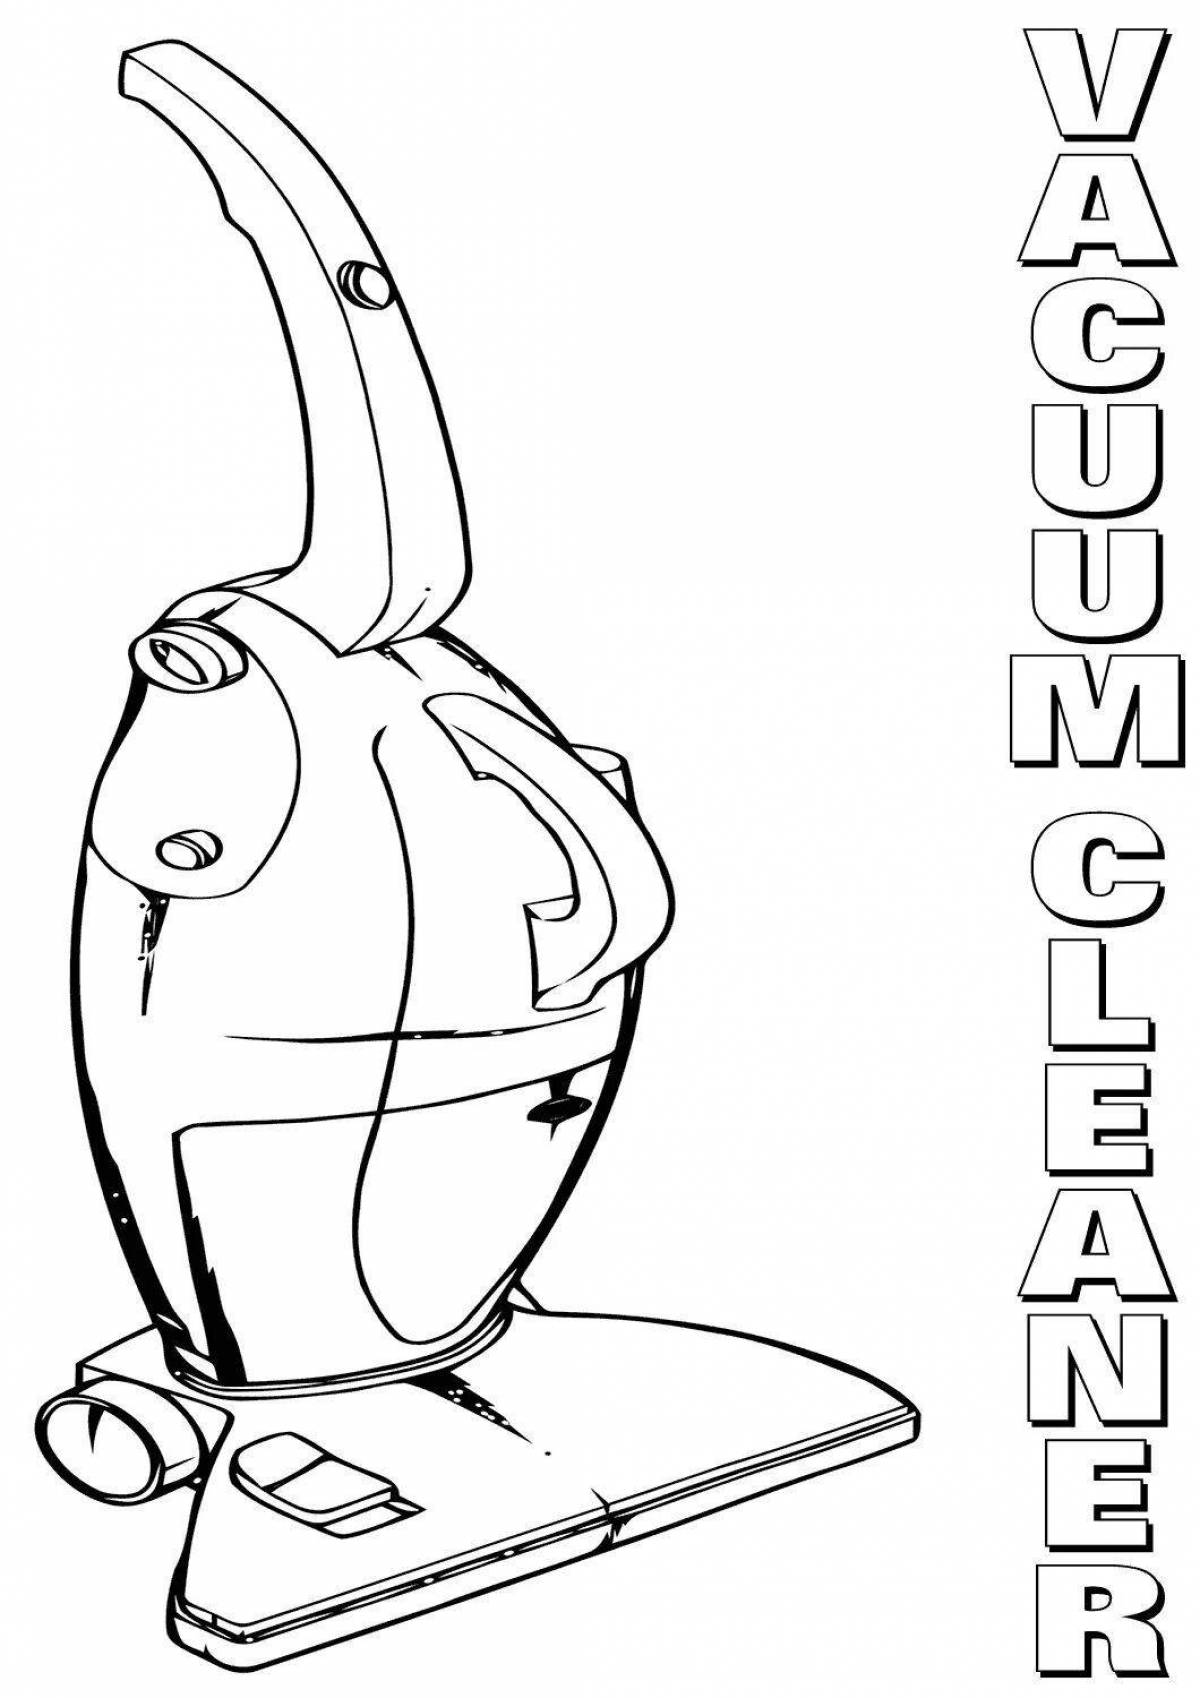 Colorful coloring page vacuum cleaner for 5-6 year olds